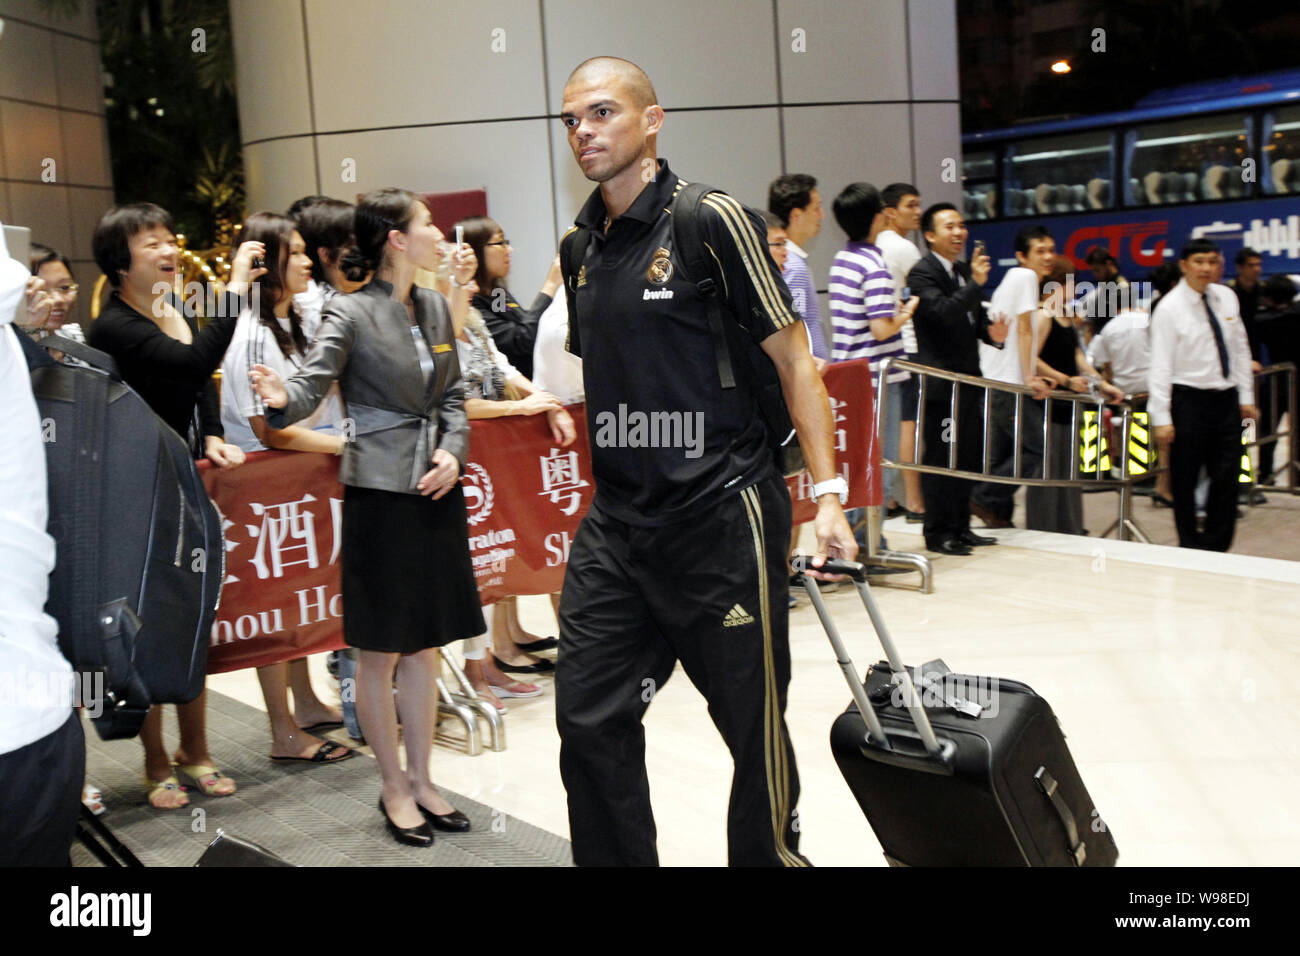 Kepler Laveran Lima Ferreira, known as Pepe, of Real Madrid arrives at the Sheraton Guangzhou Hotel in Guangzhou city, south Chinas Guangdong province Stock Photo